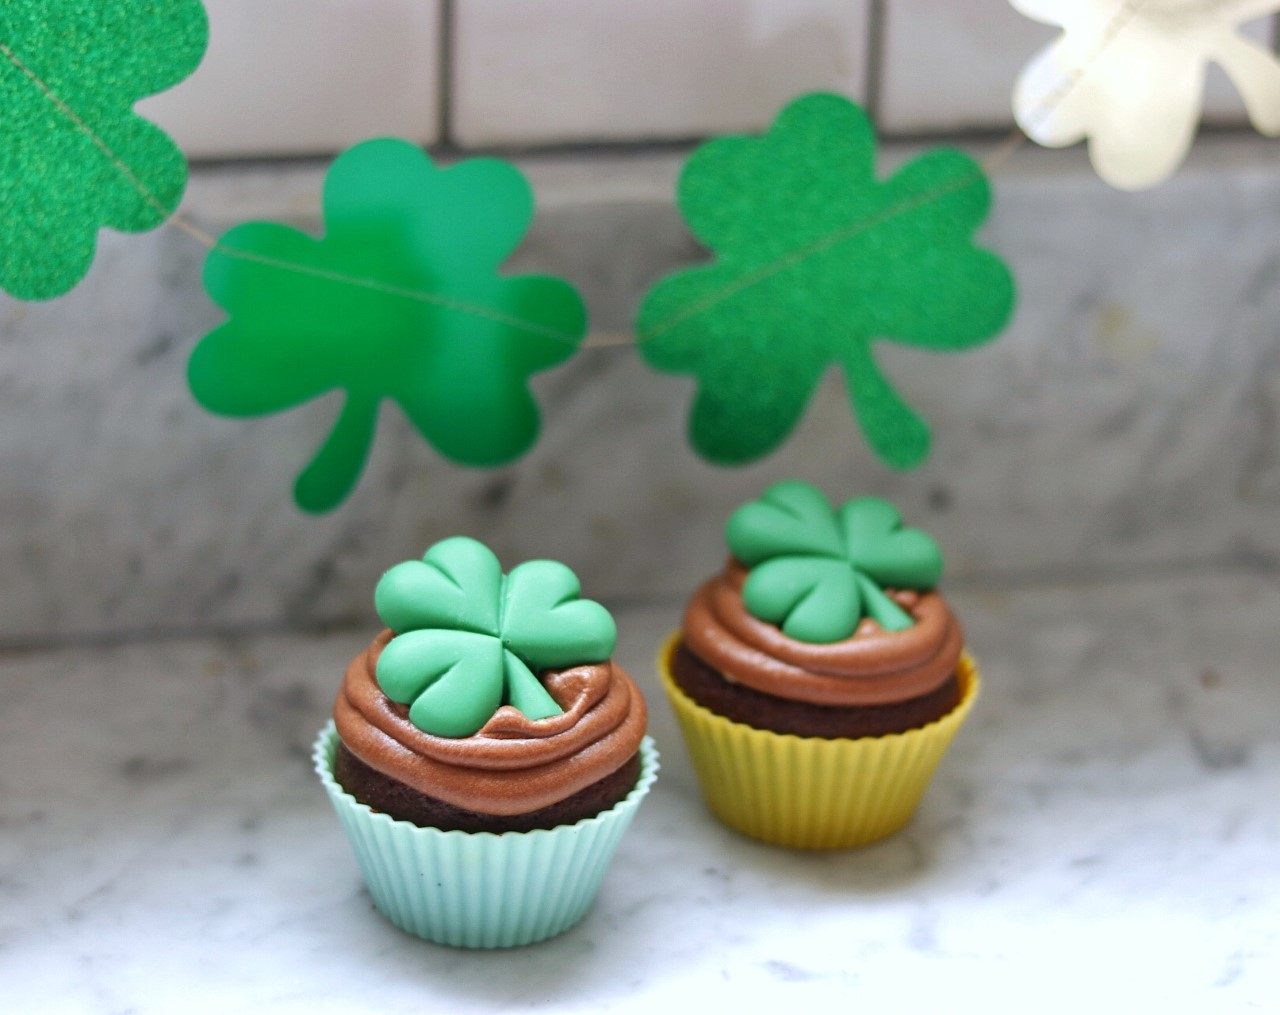 St. Patrick's Day dessert idea: Guinness Cupcakes with Guinness Frosting recipe